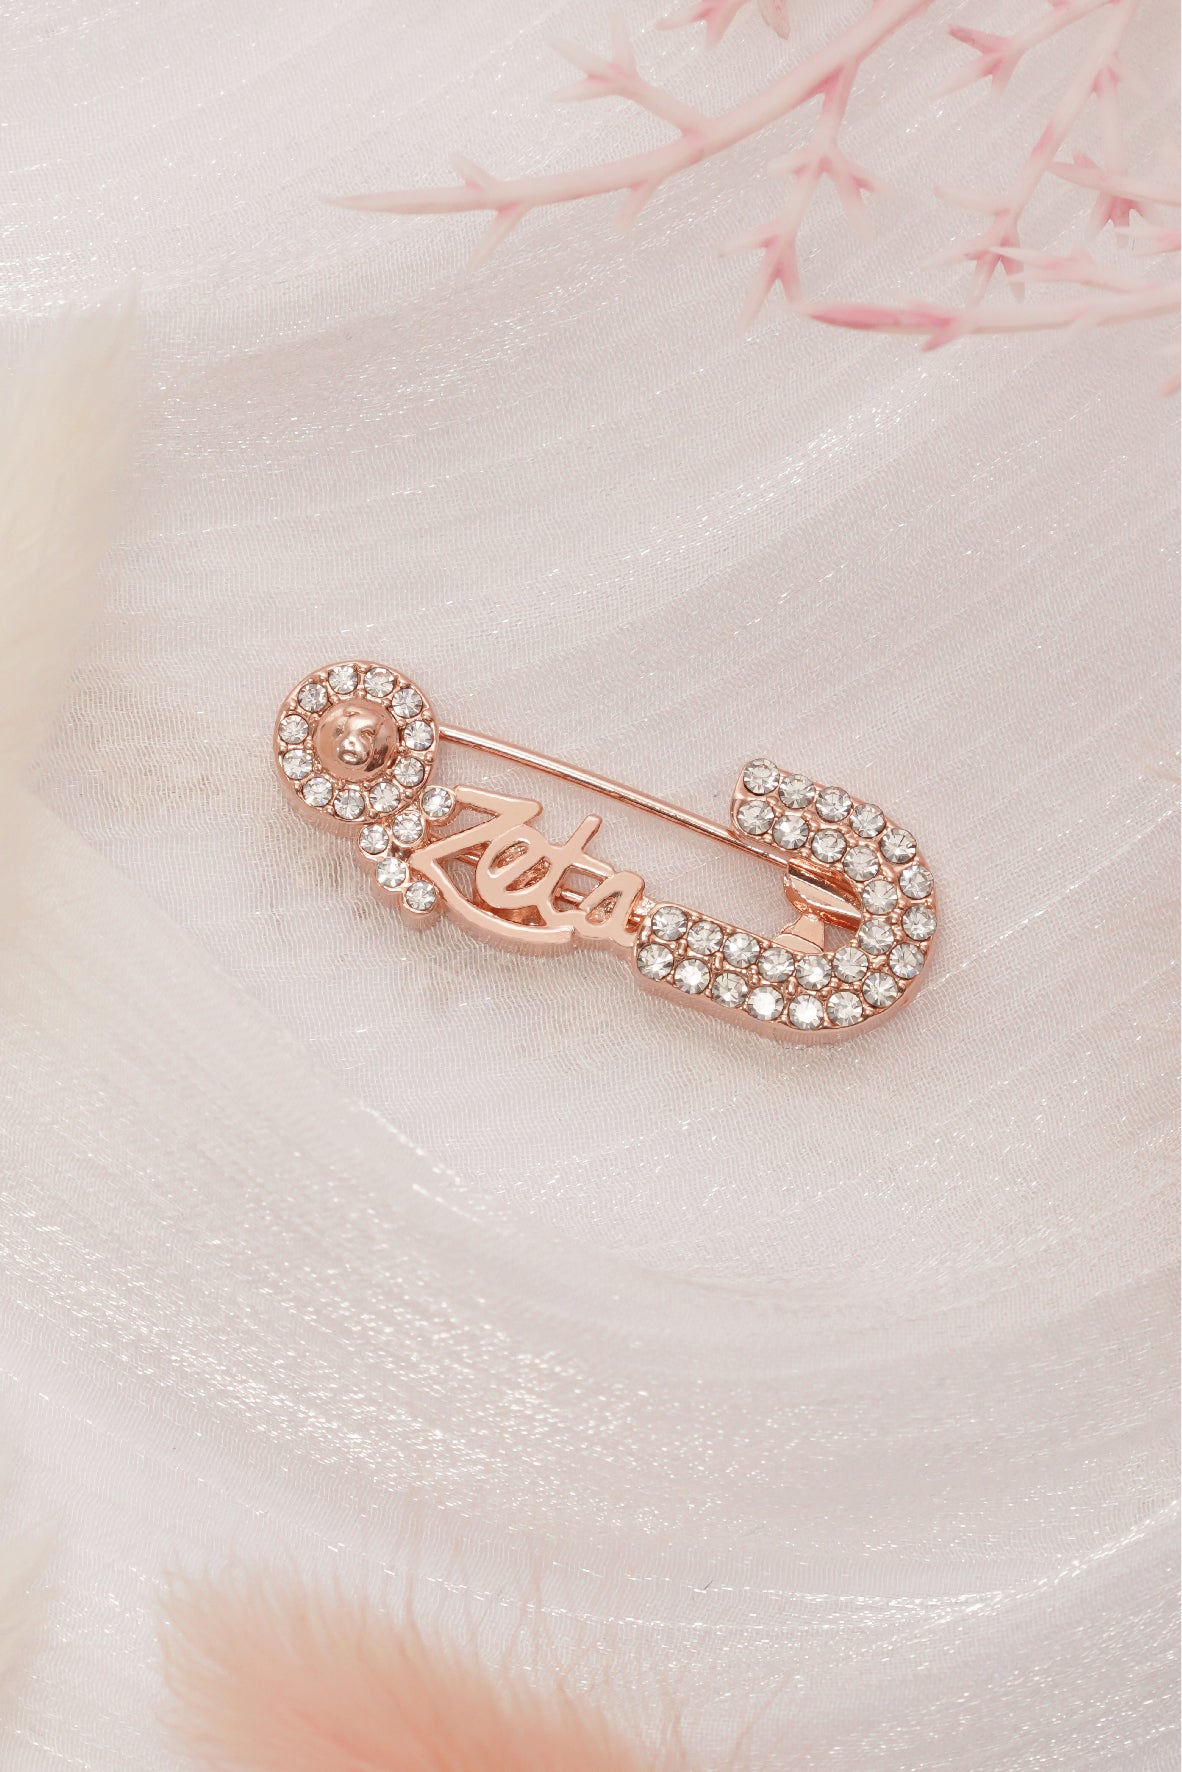 Safety Hijab Pin With Crystal - Rose Gold